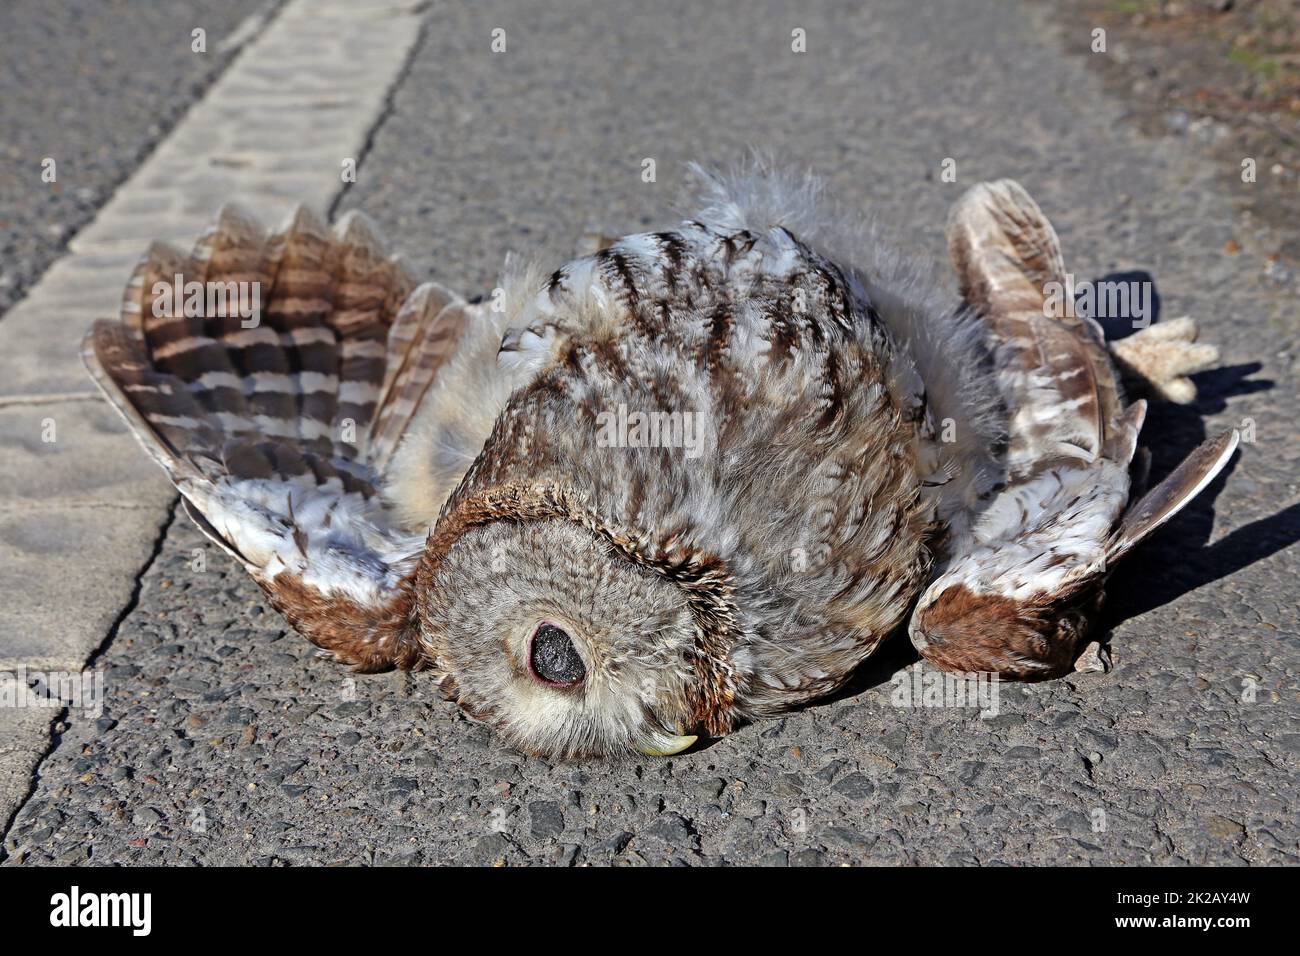 Dead tawny owl on the side of the road Stock Photo